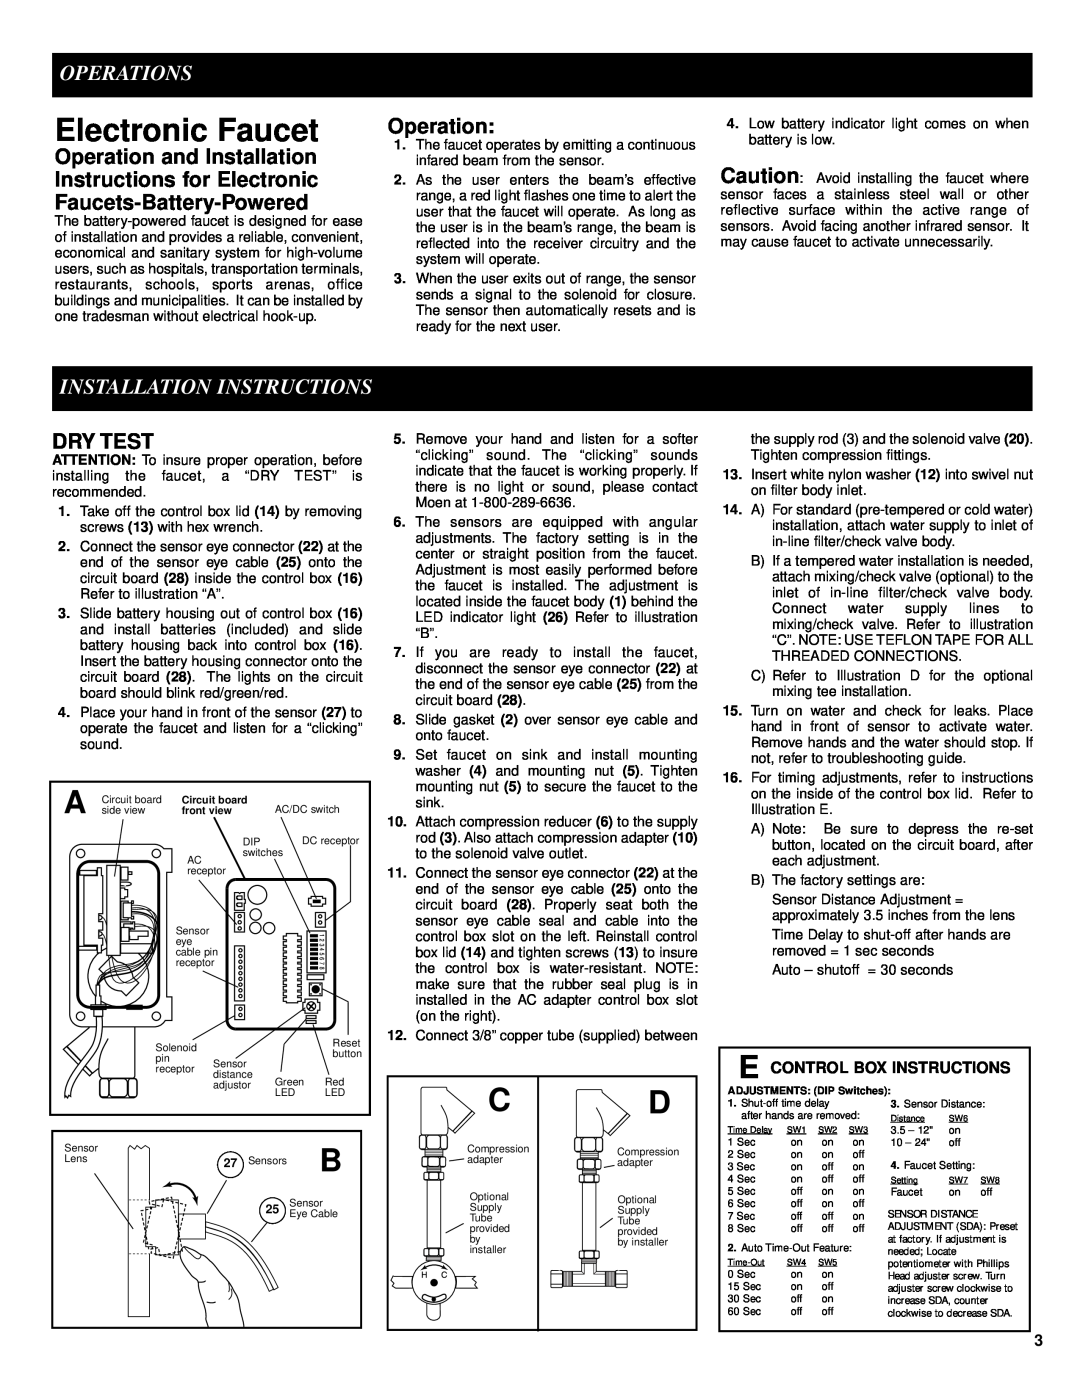 Moen 8302 manual Electronic Faucet, Operations, Installation Instructions, Dry Test 